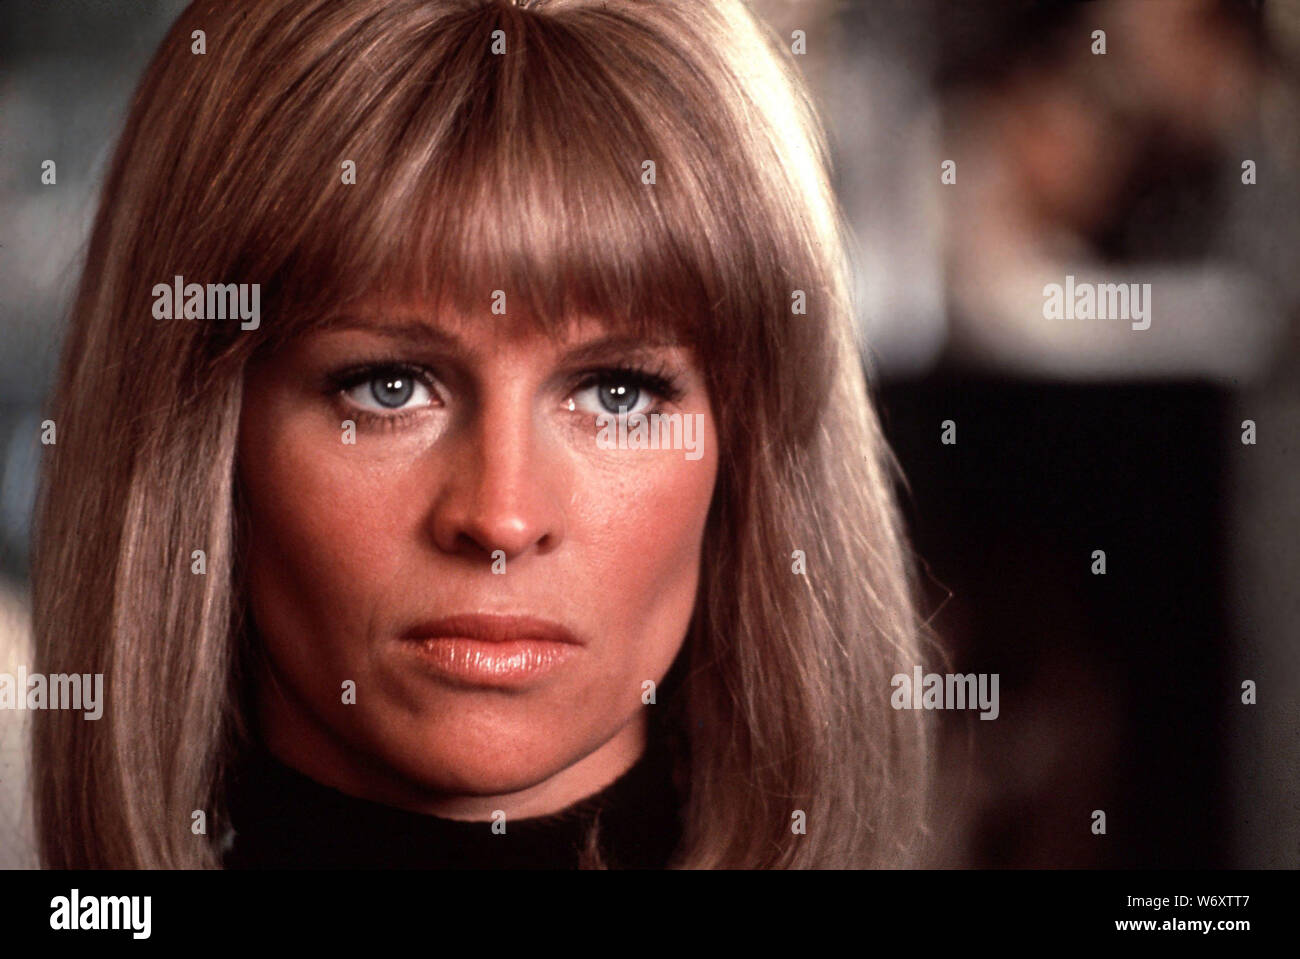 JULIE CHRISTIE in SHAMPOO (1975), directed by HAL ASHBY. Credit: COLUMBIA PICTURES / Album Stock Photo